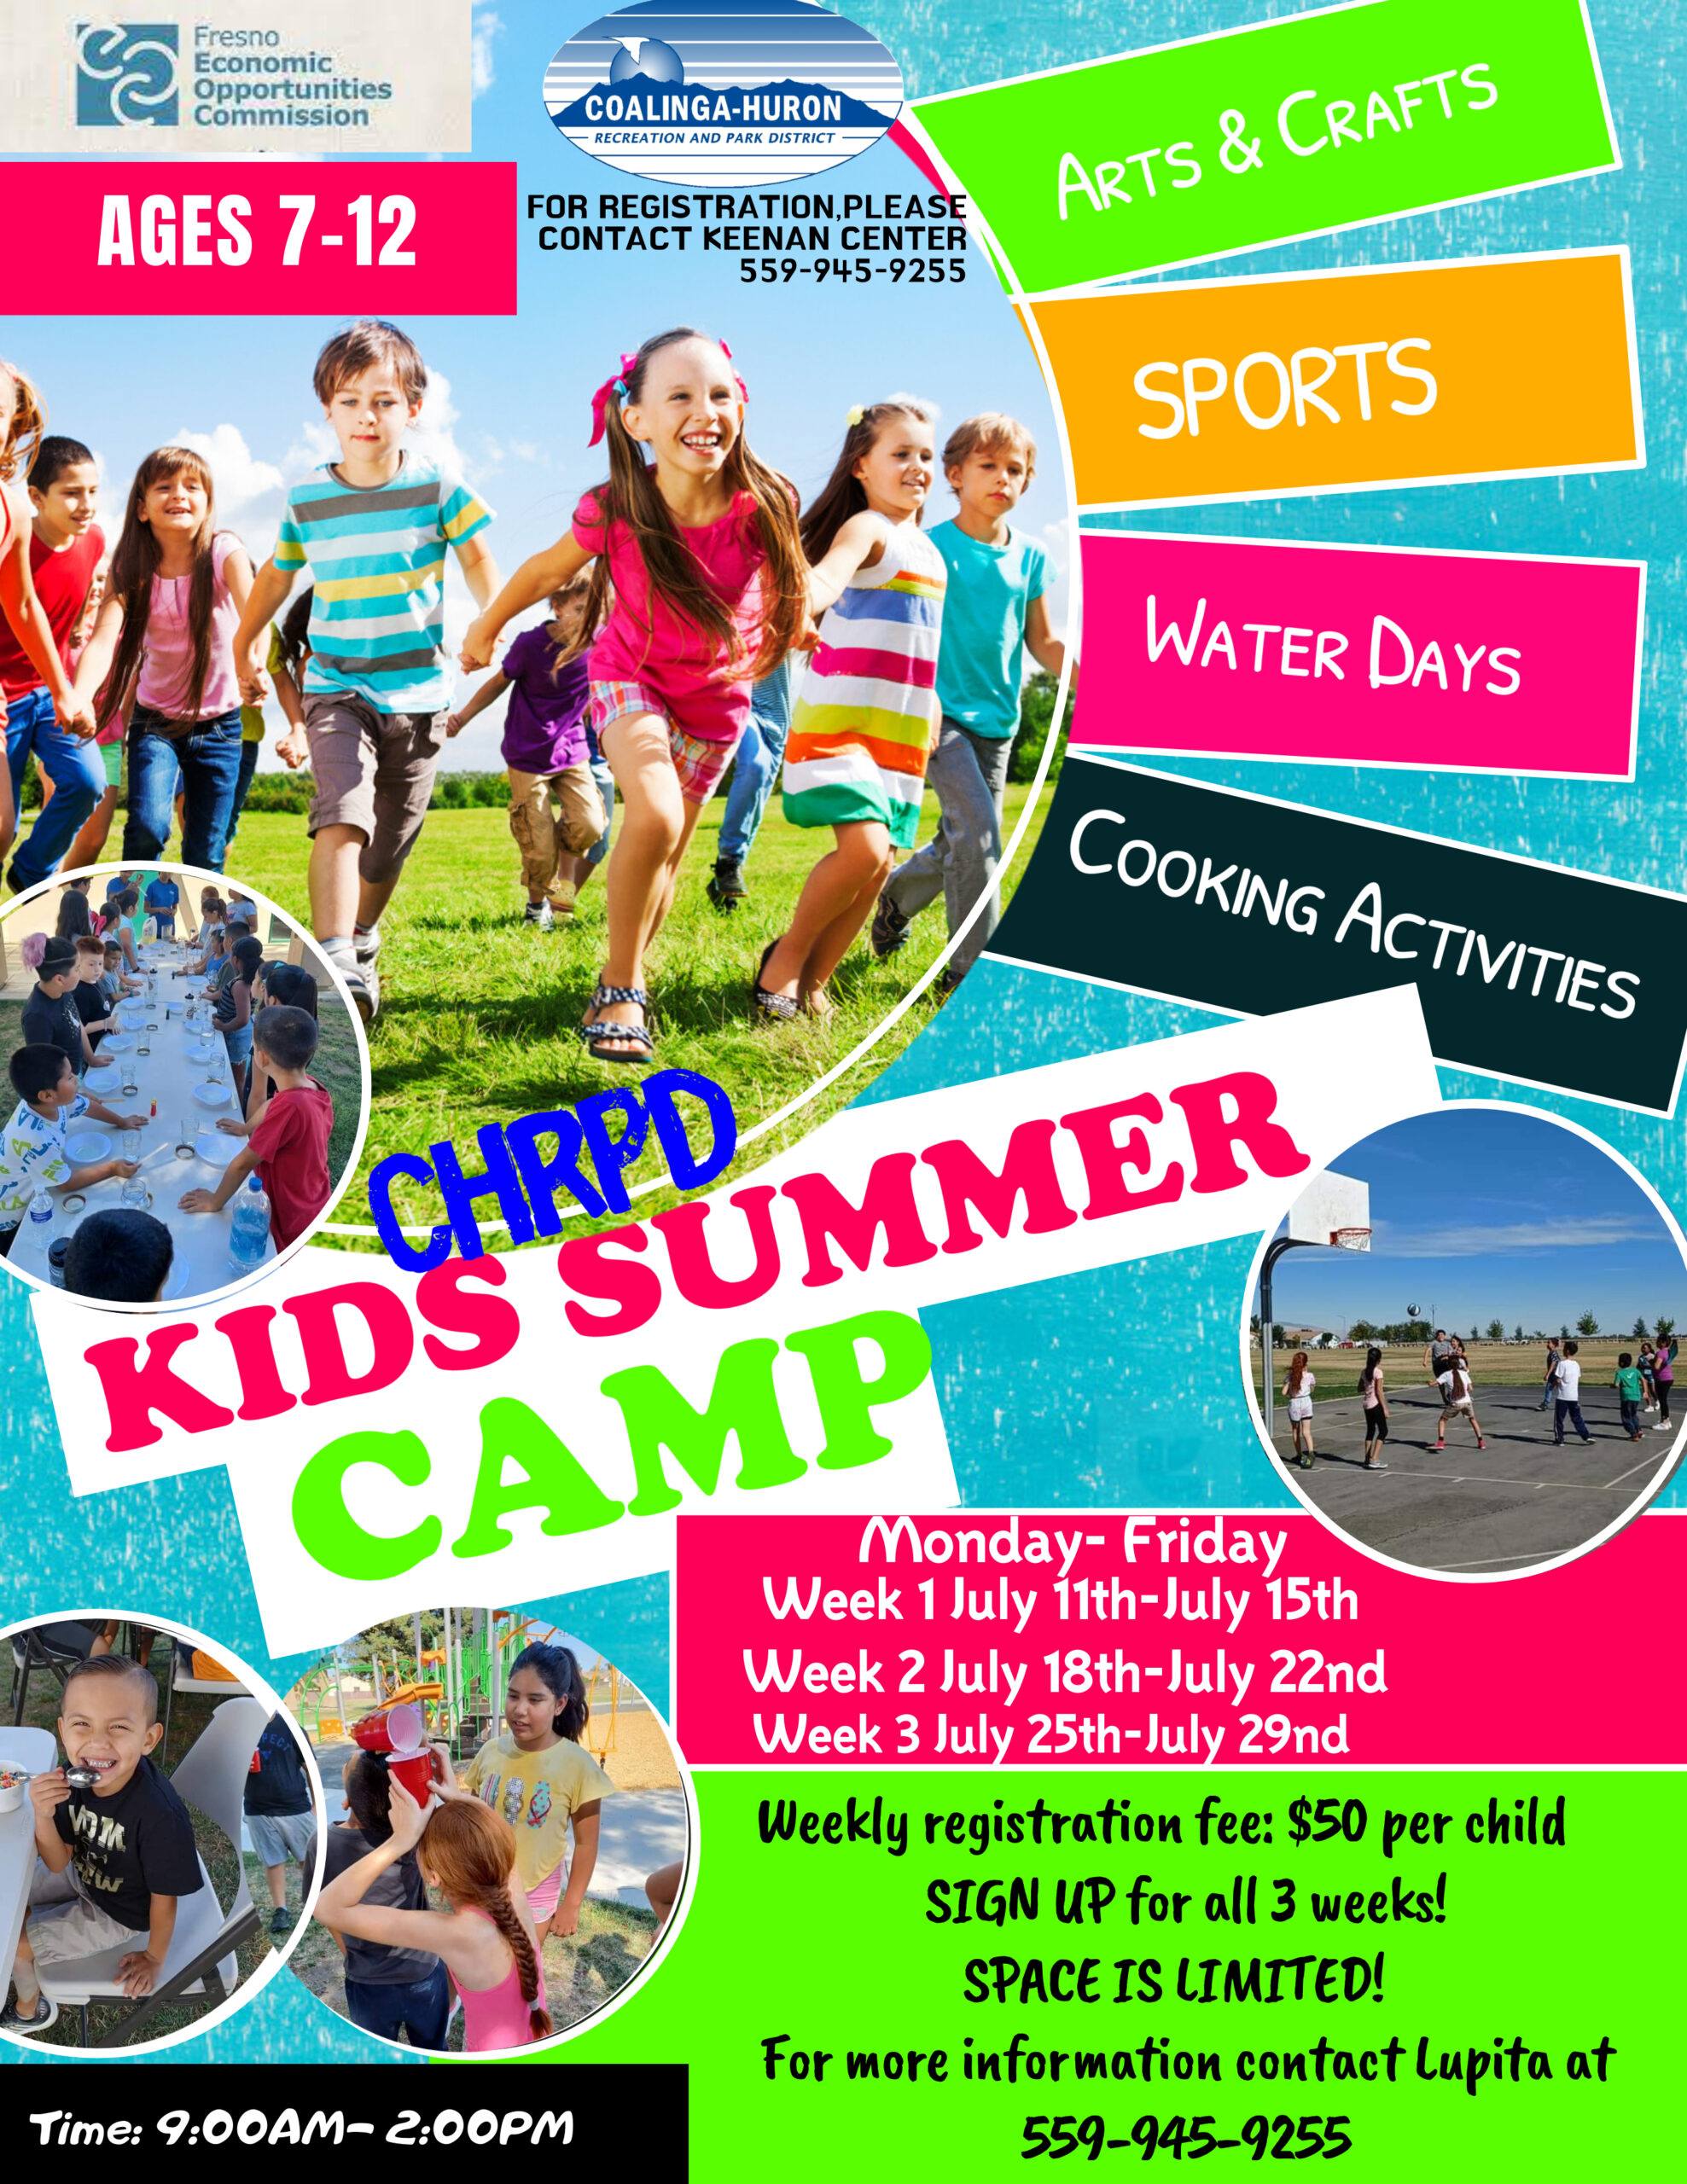 HURON SUMMER DAY CAMPS